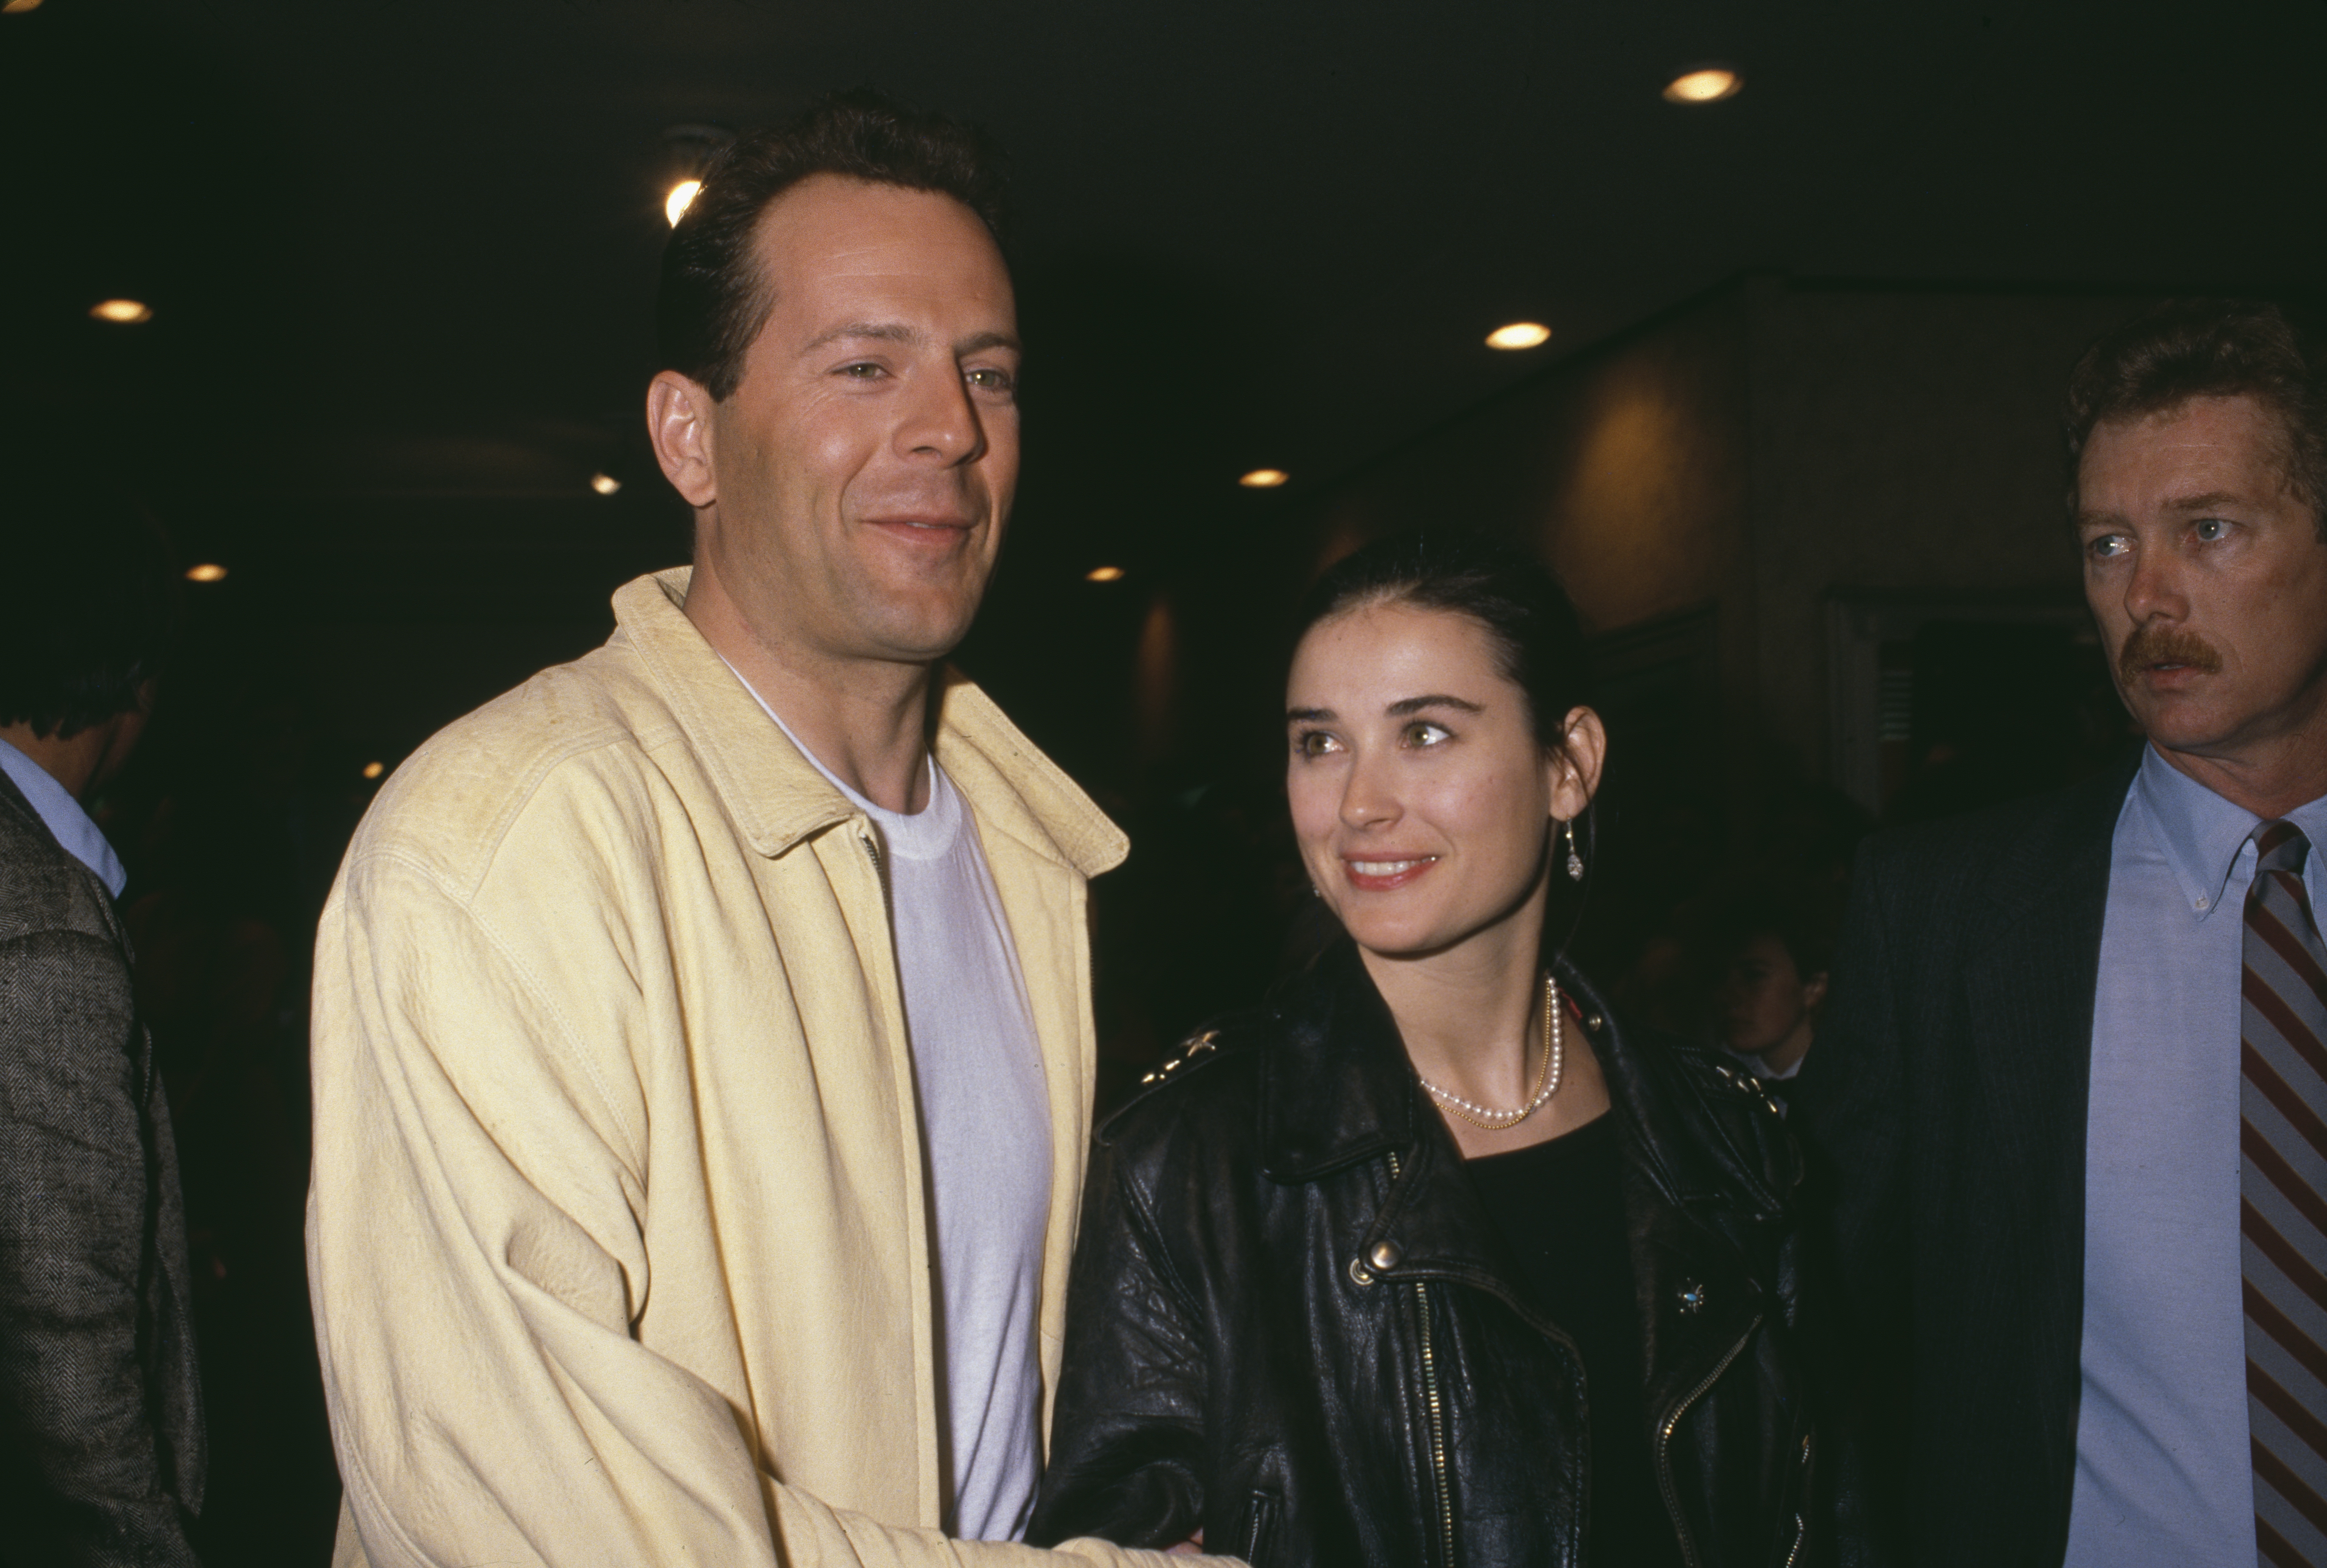 Bruce Willis and Demi Moore in Los Angeles, California, on March 8, 1989 | Source: Getty Images